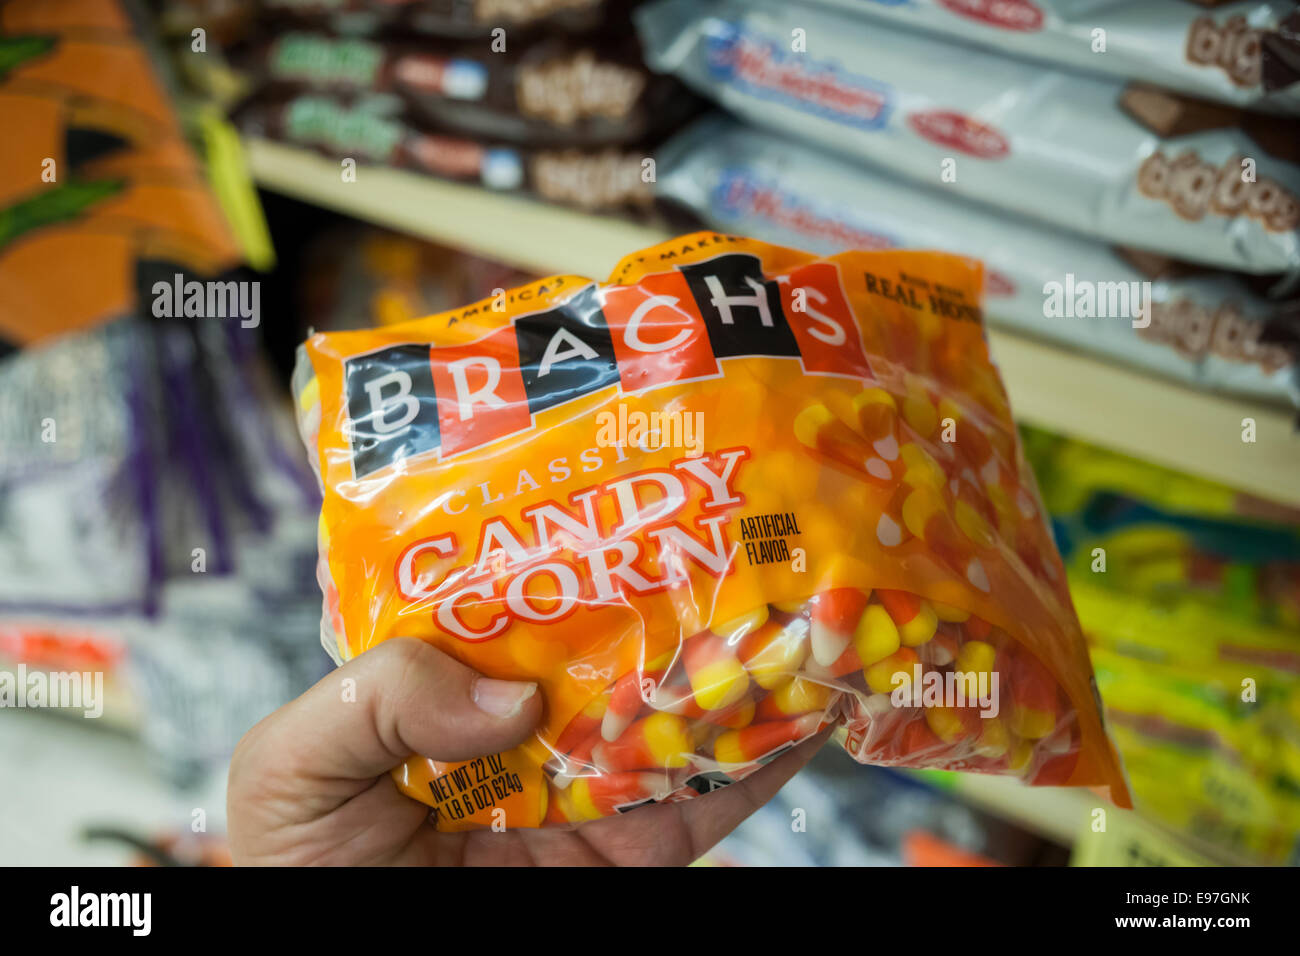 A shopper chooses a bag of Brach's Halloween candy corn in a supermarket in  New York Stock Photo - Alamy